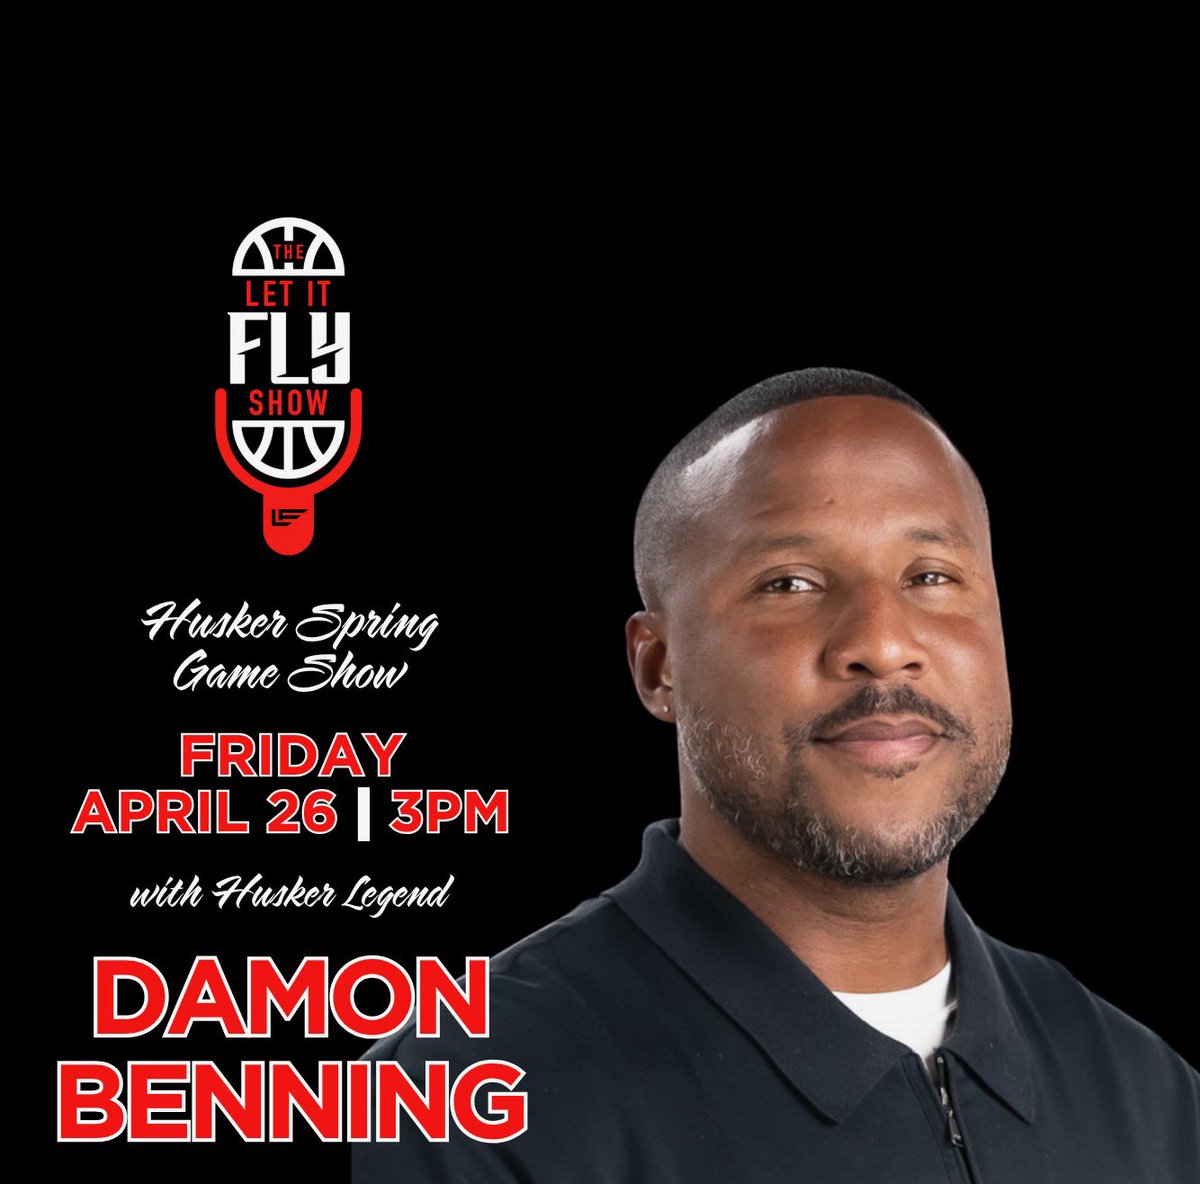 Our next episode covers the Spring Game featuring former @HuskerFootball legend and the radio voice for the #Huskers, Damon Benning (@damonbenning ). The episode drops TODAY at 3pm!

Hit the link in our bio to SUBSCRIBE!

#LetItFly #Omaha #Nebraska #Football #GBR